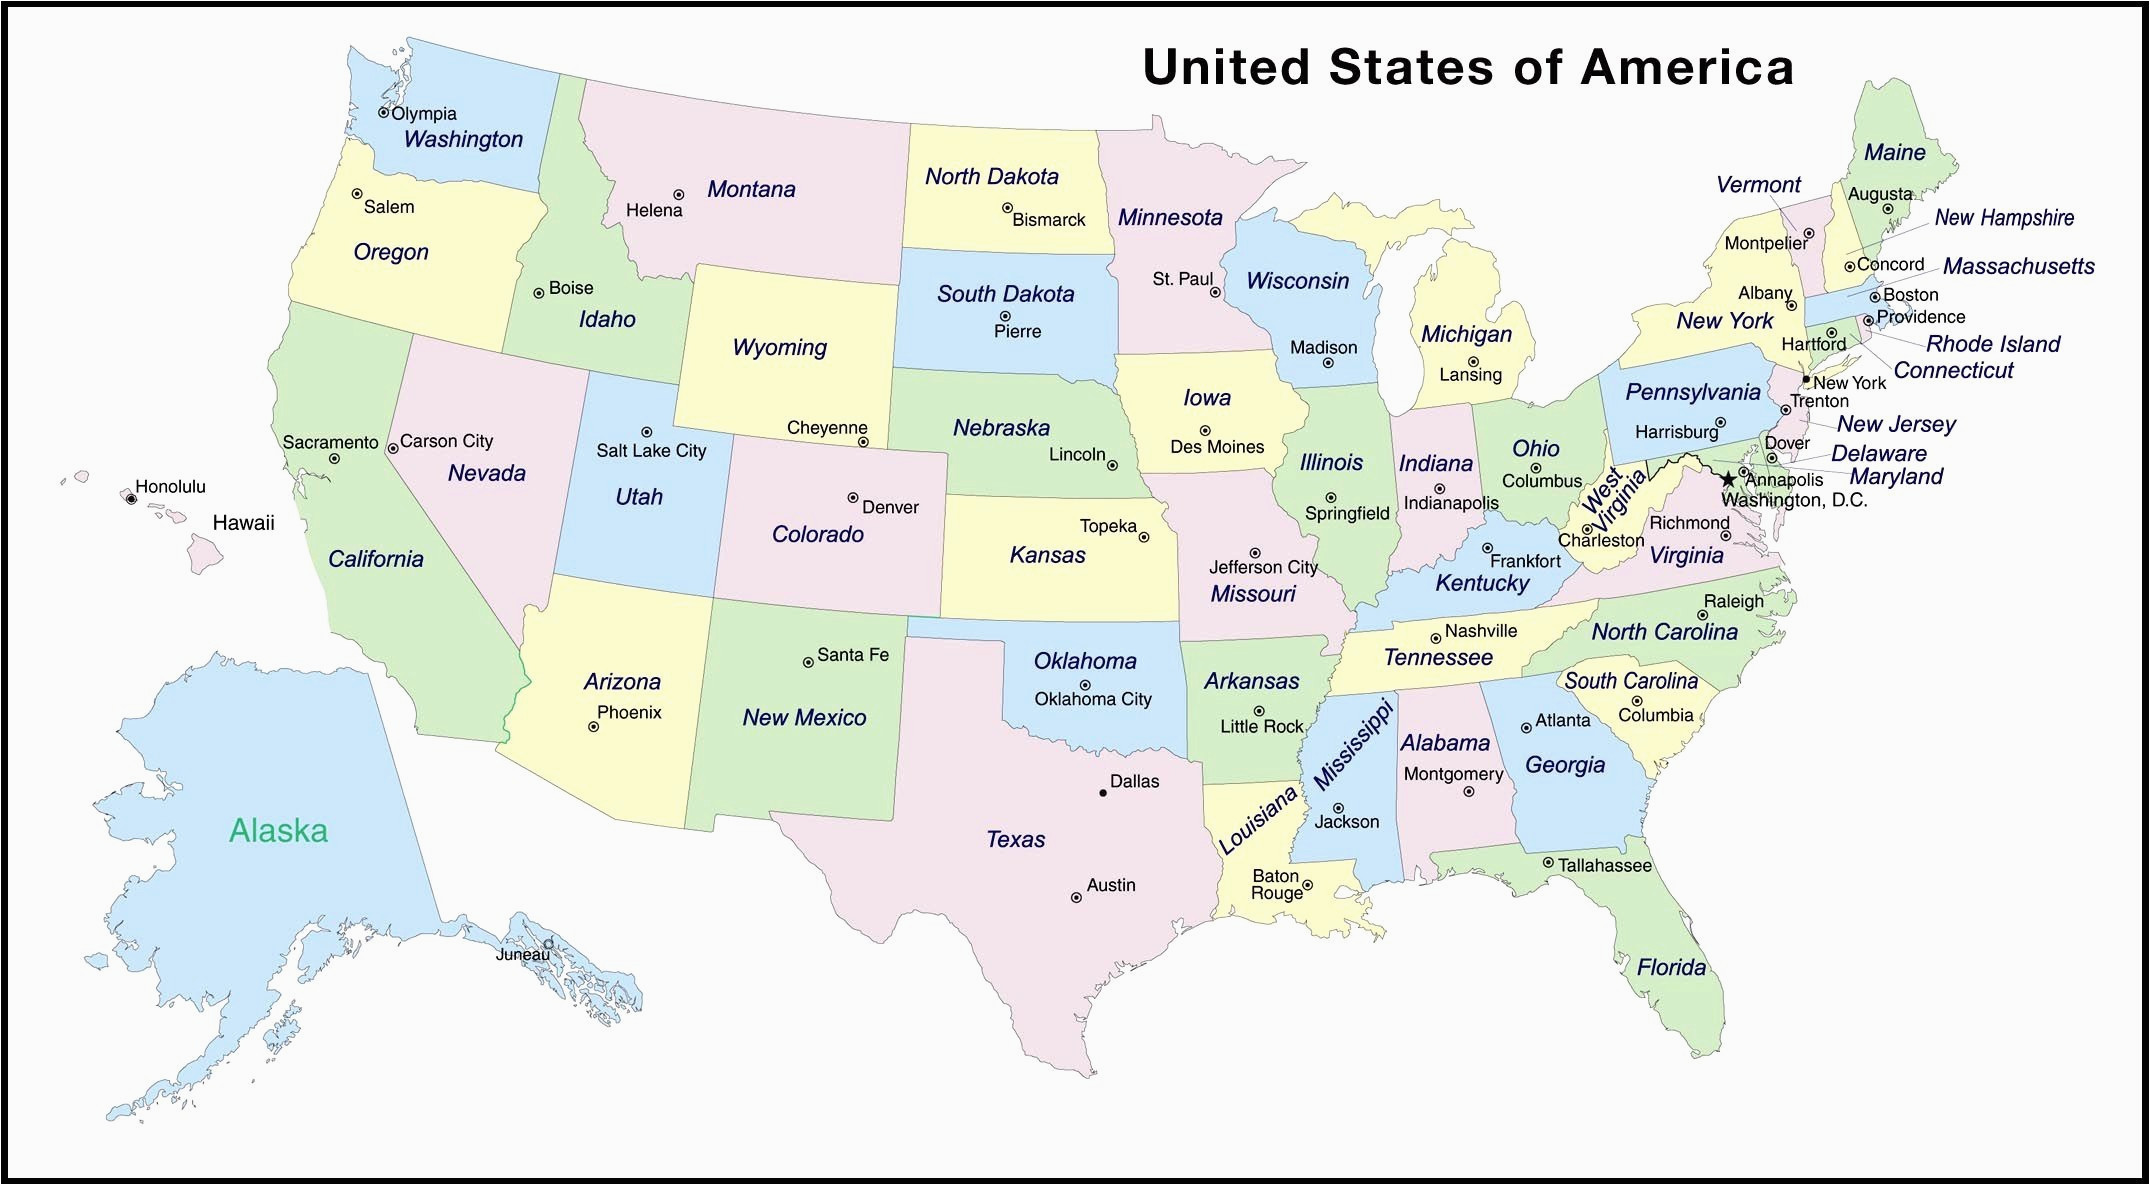 united states zip code map new united states area codes map new map